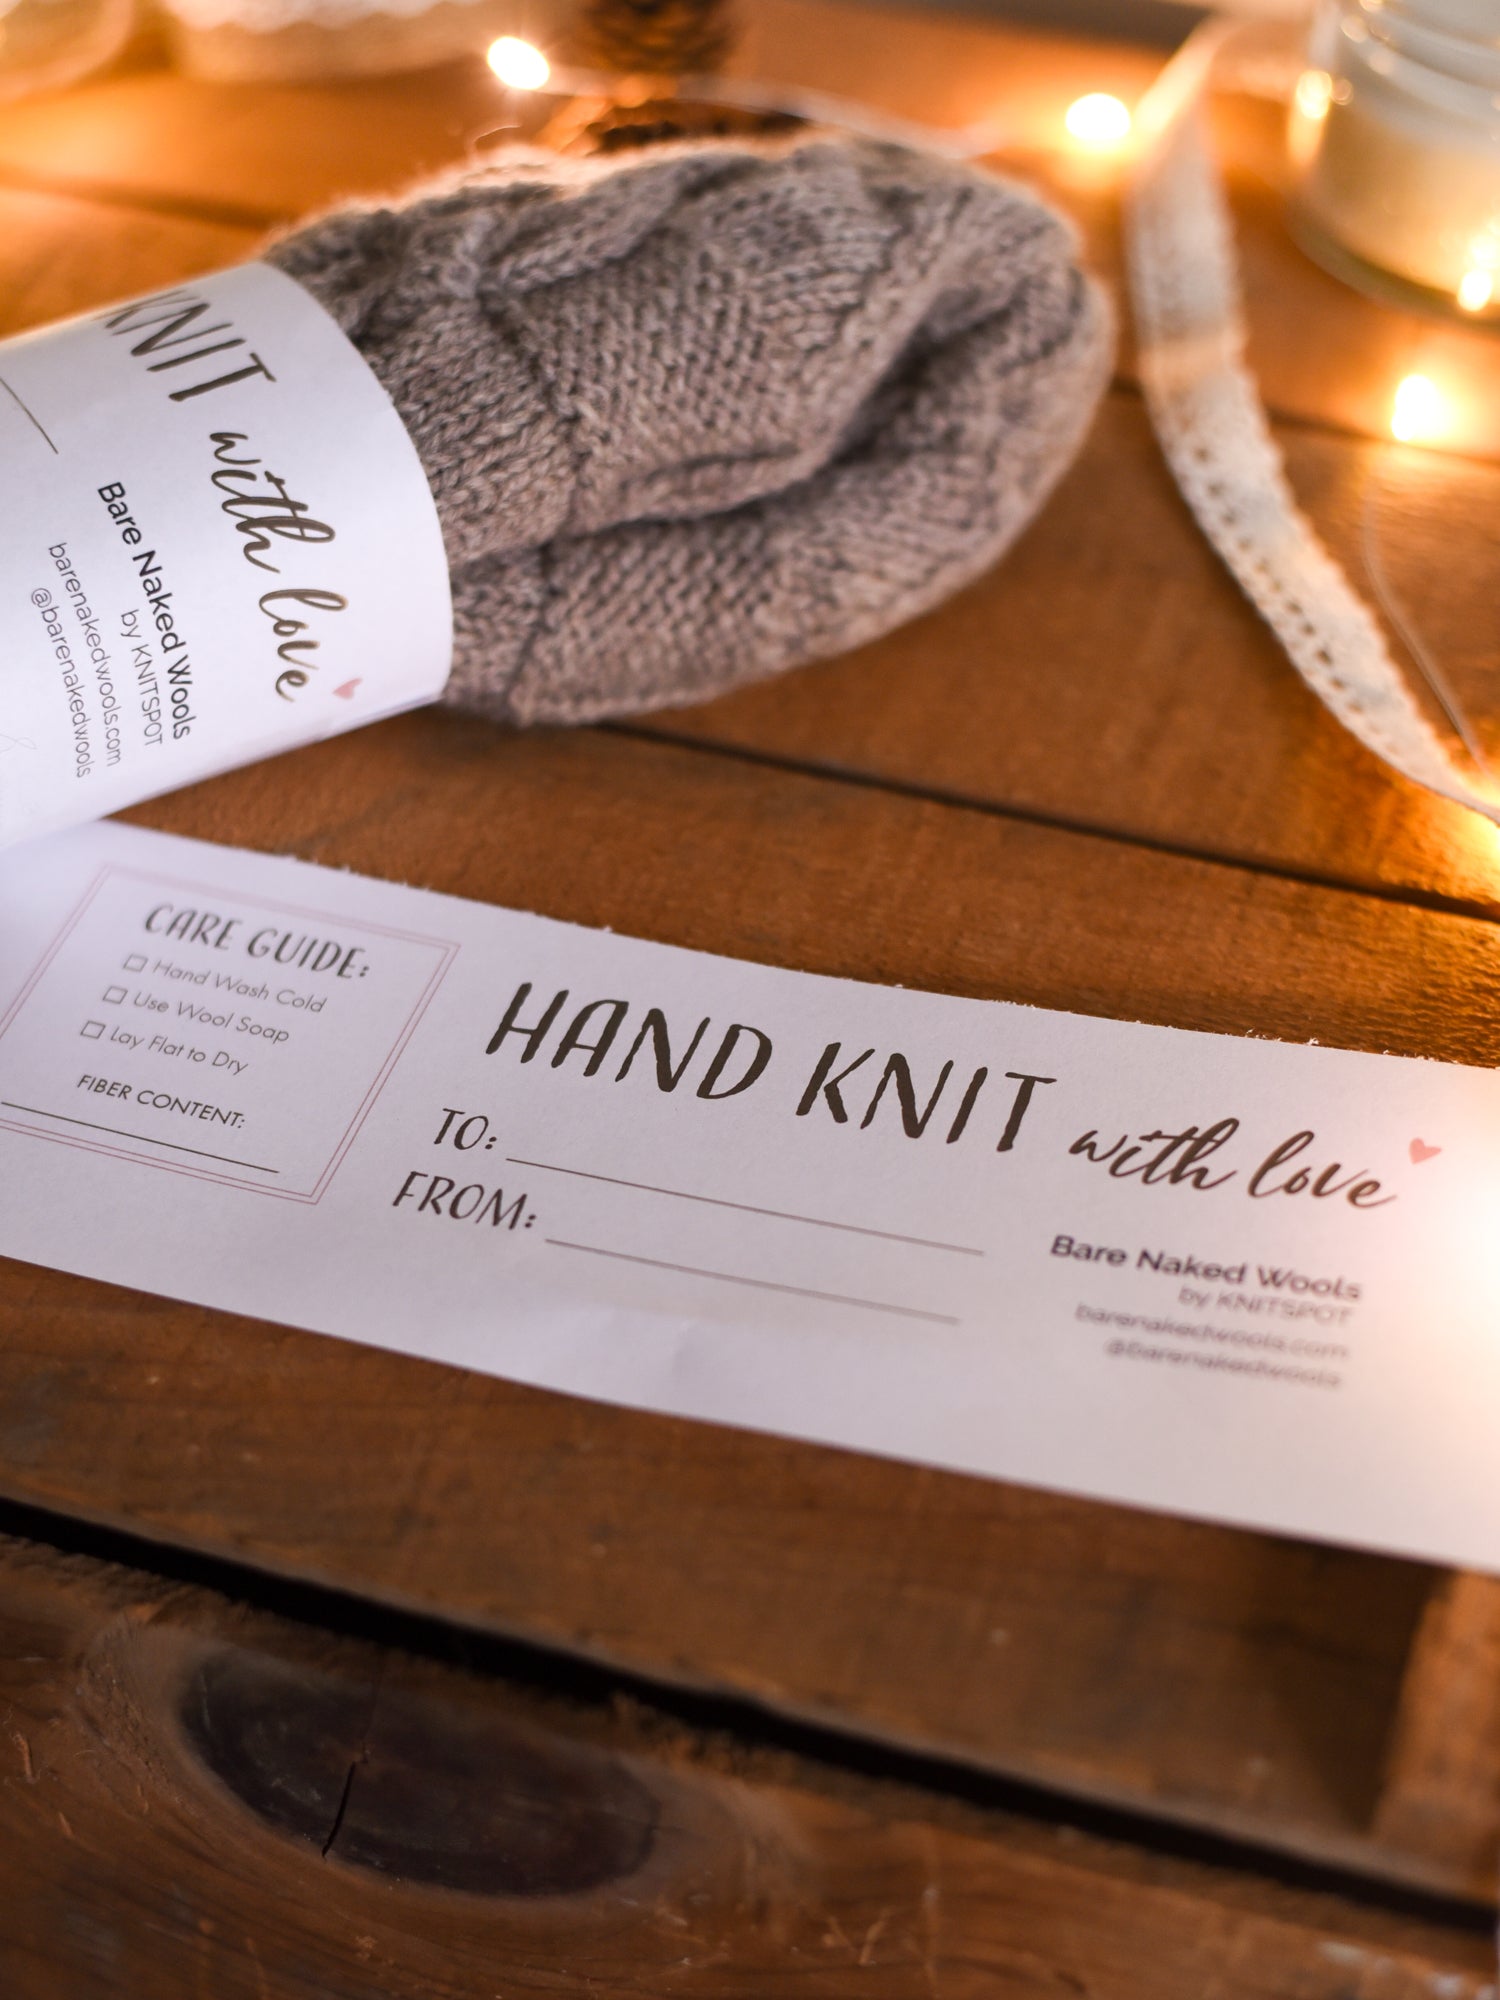 Printable Gift Tag - "Handknit with Love"